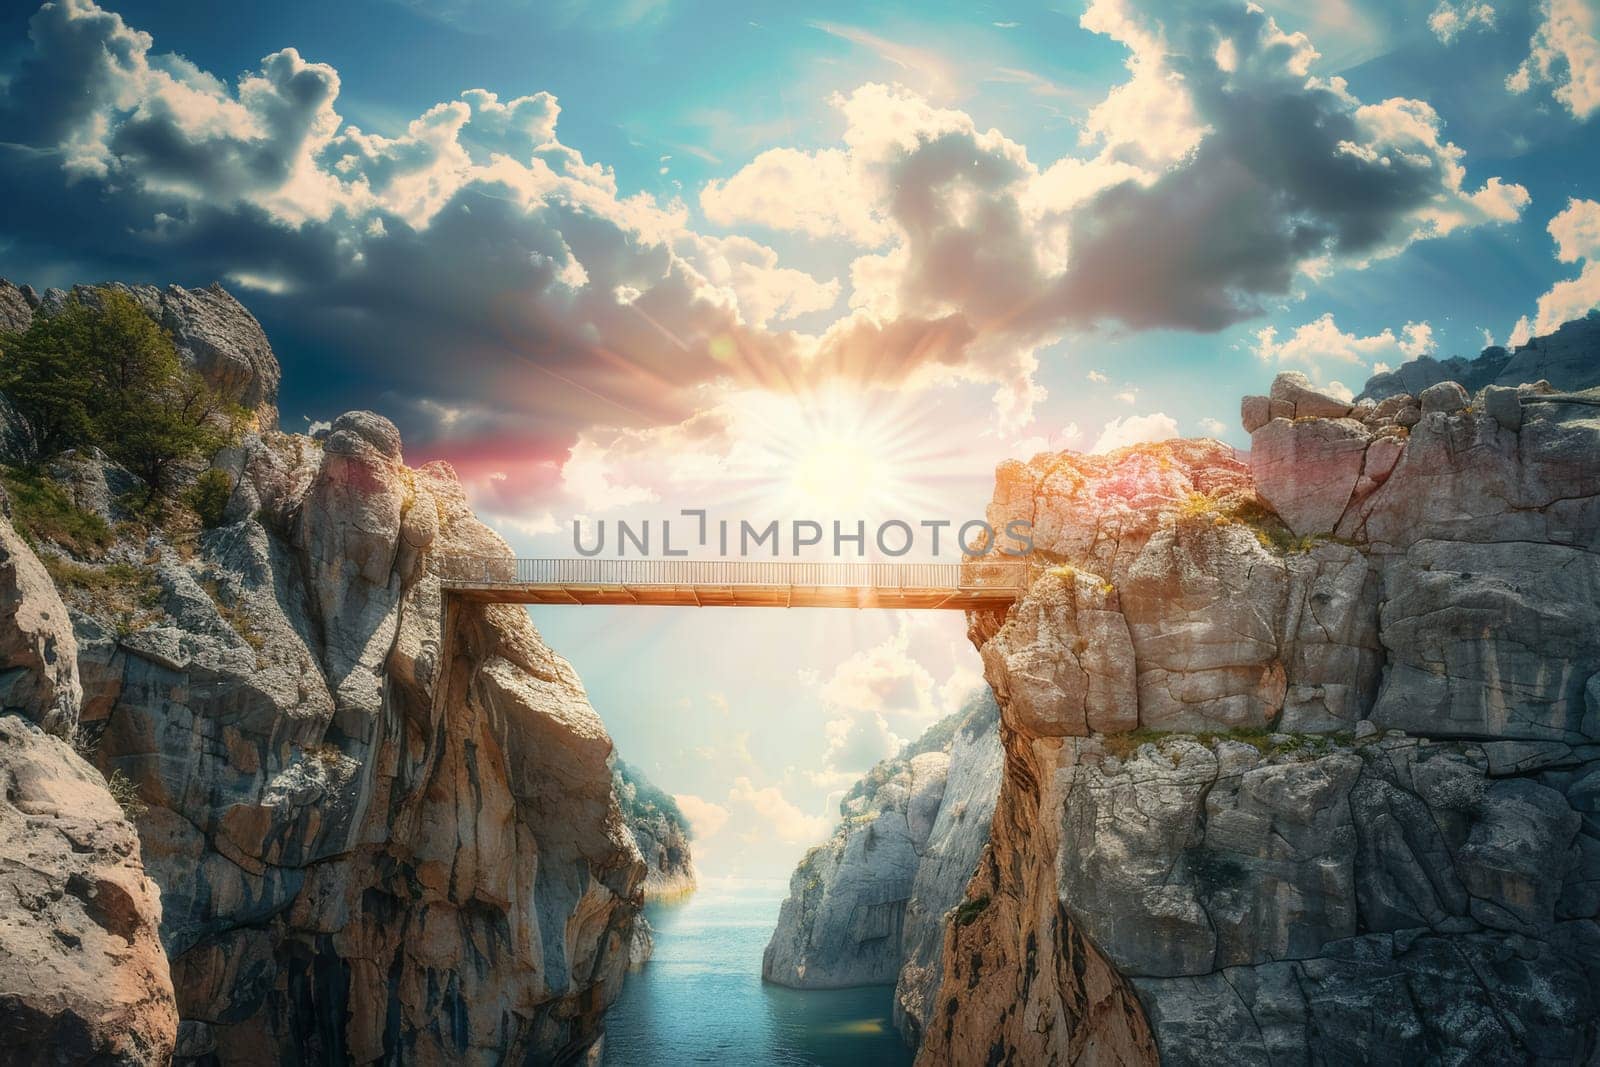 A sturdy bridge arches gracefully between towering cliffs above a serene blue inlet, with a clear sky extending into the horizon.